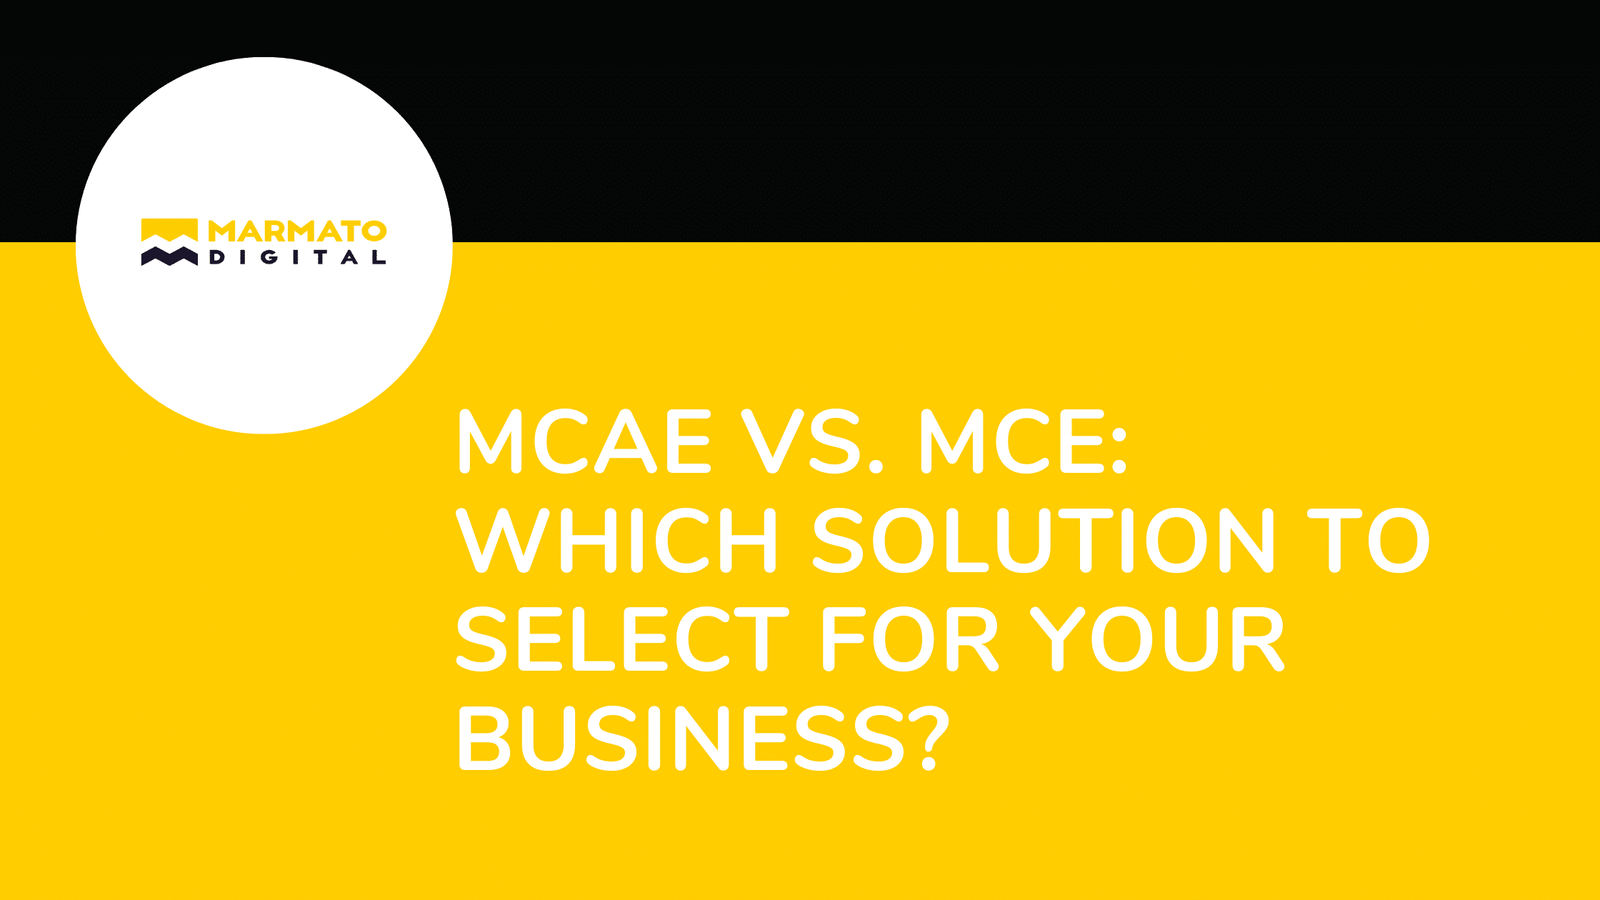 MCAE (Pardot) vs. MCE: Which solution to select for your business?